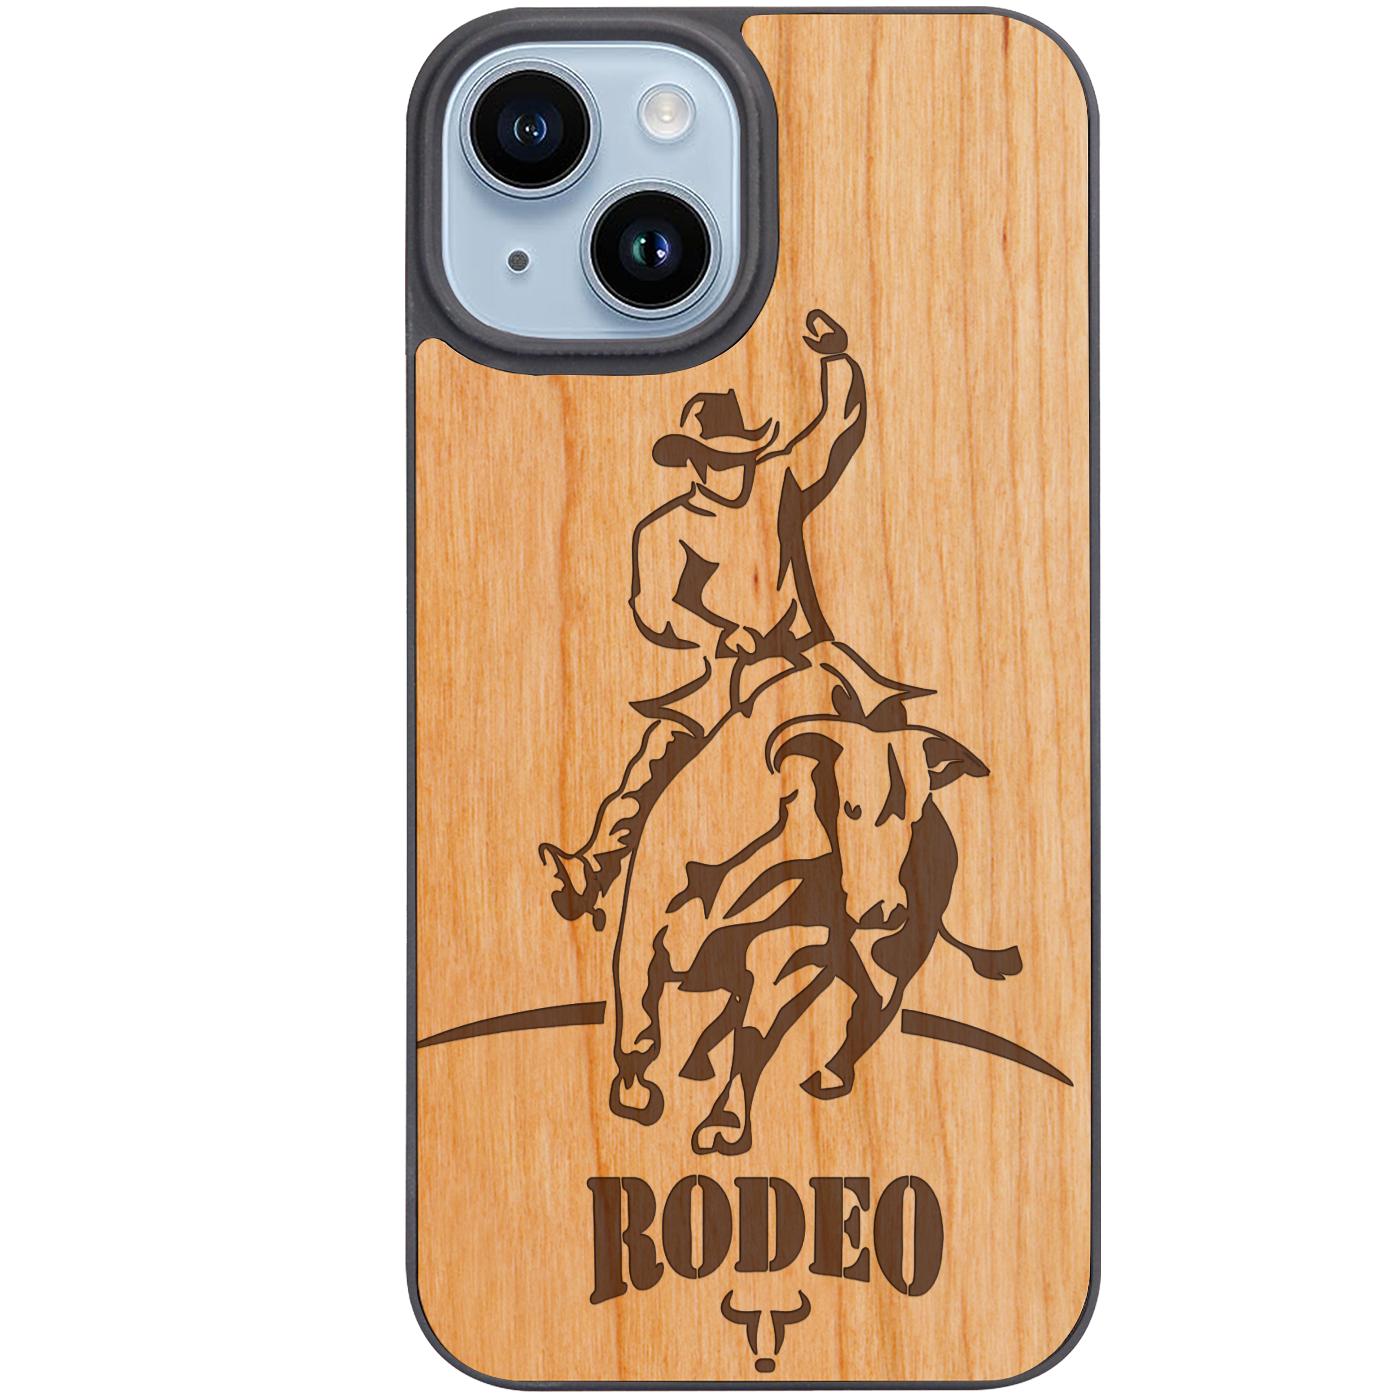 Rodeo 2 - Engraved Phone Case